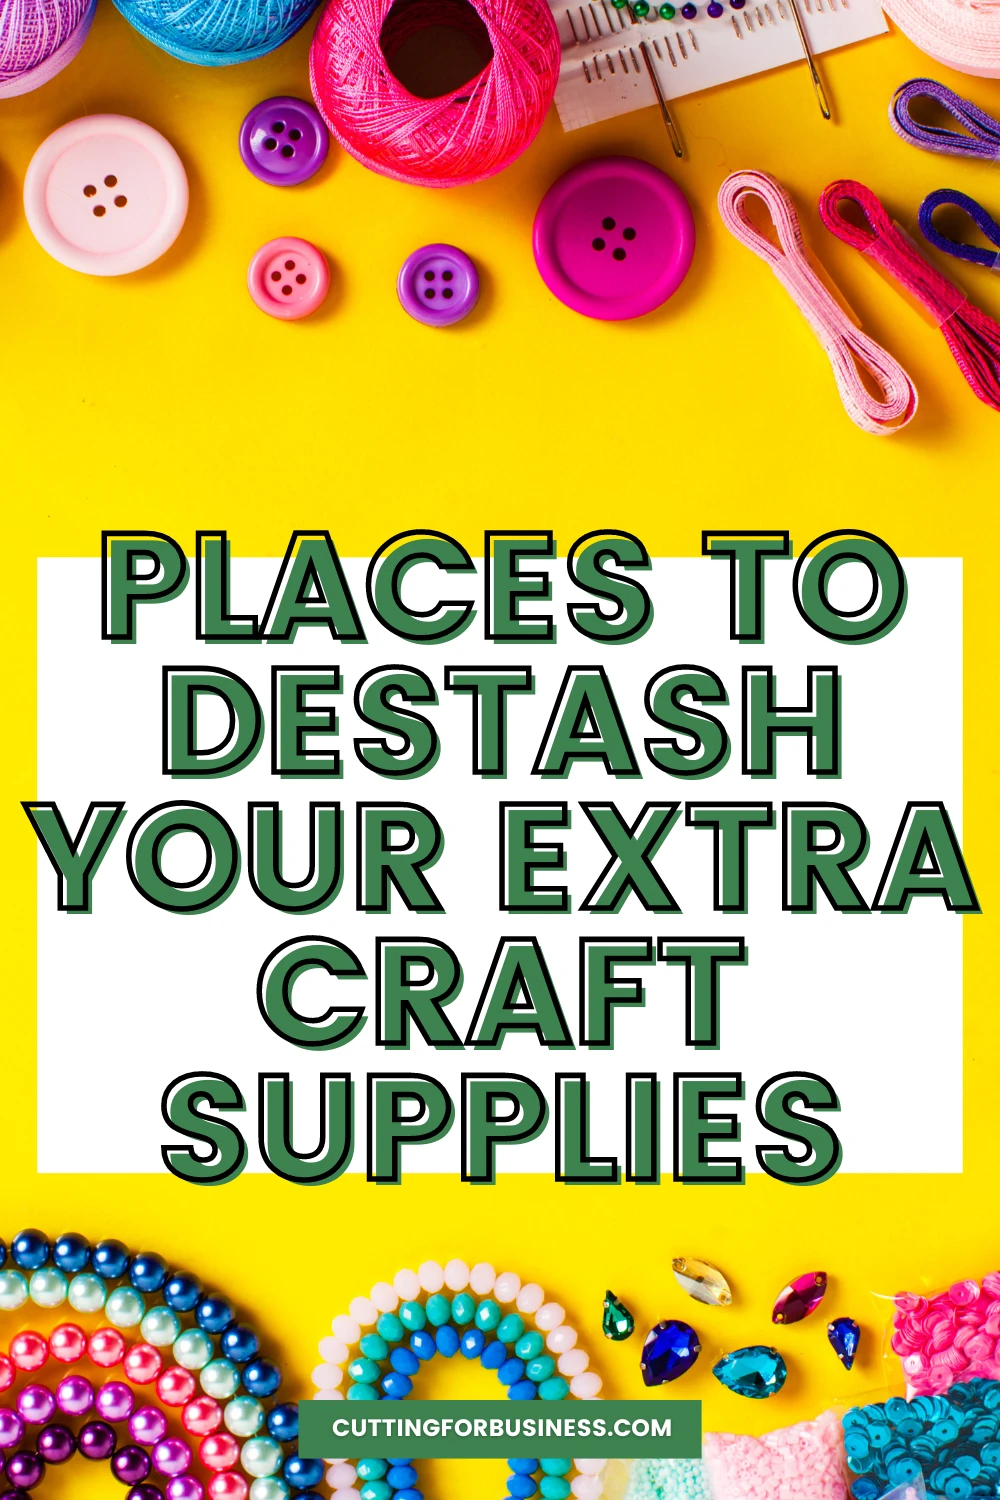 Places to Destash Your Extra Craft Supplies - Cutting for Business